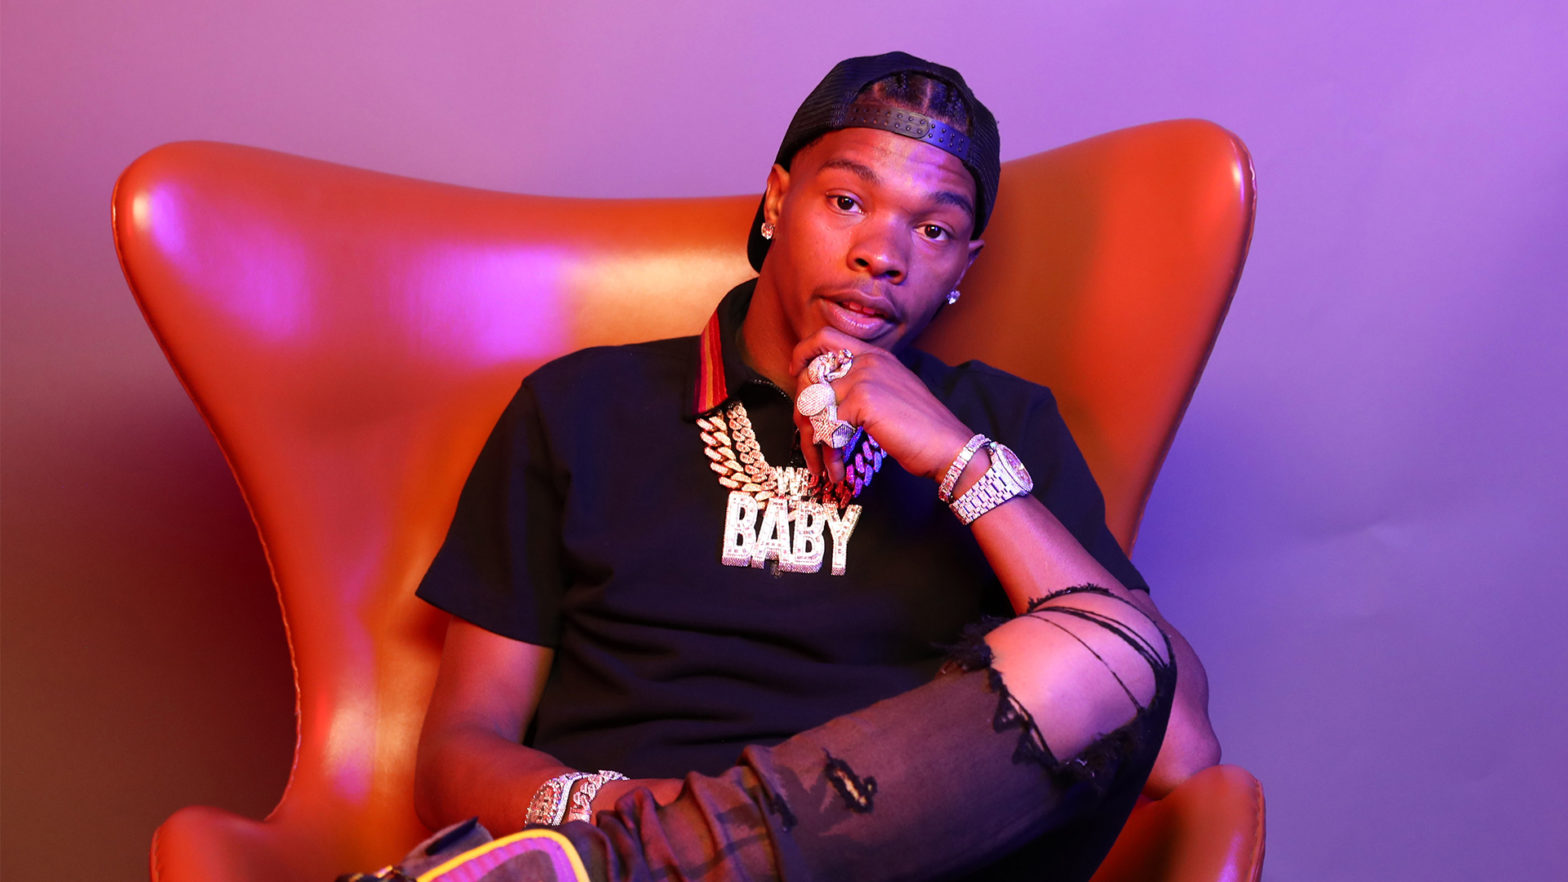 Lil Baby's $5M Net Worth Seems To Be Just The Beginning Of His Business Prowess